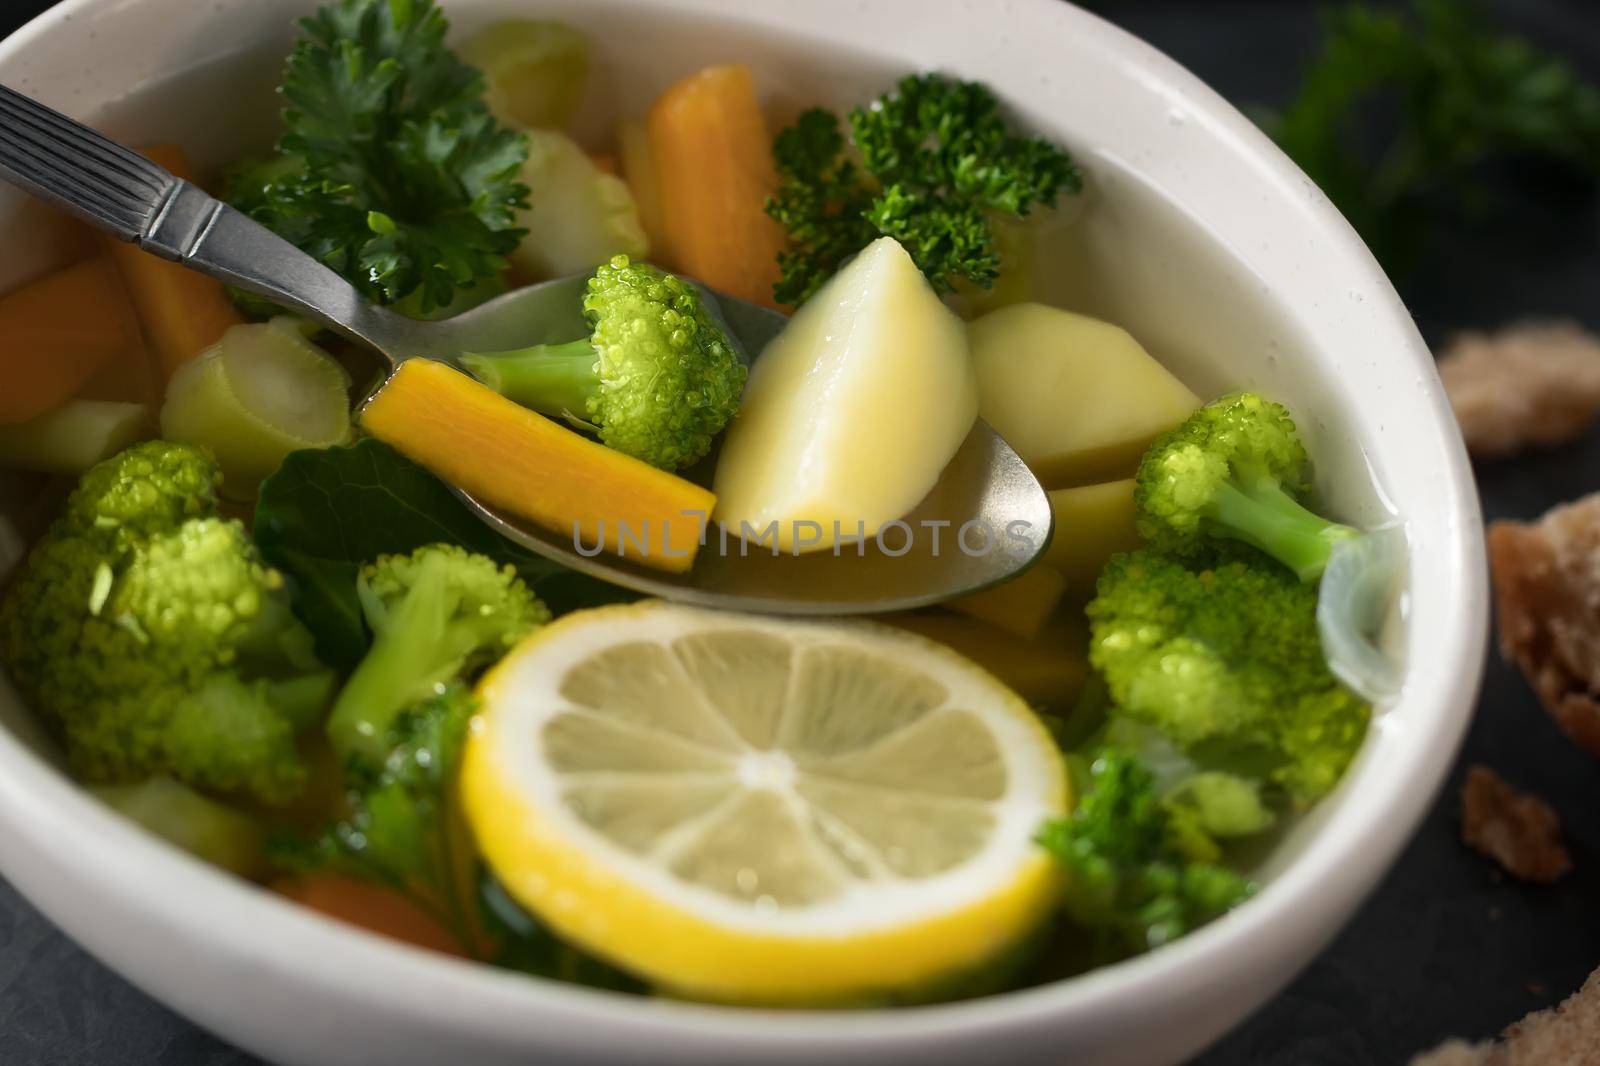 Vegetarian vegetable soup with carrots, broccoli and parsley in a light bowl, close-up.